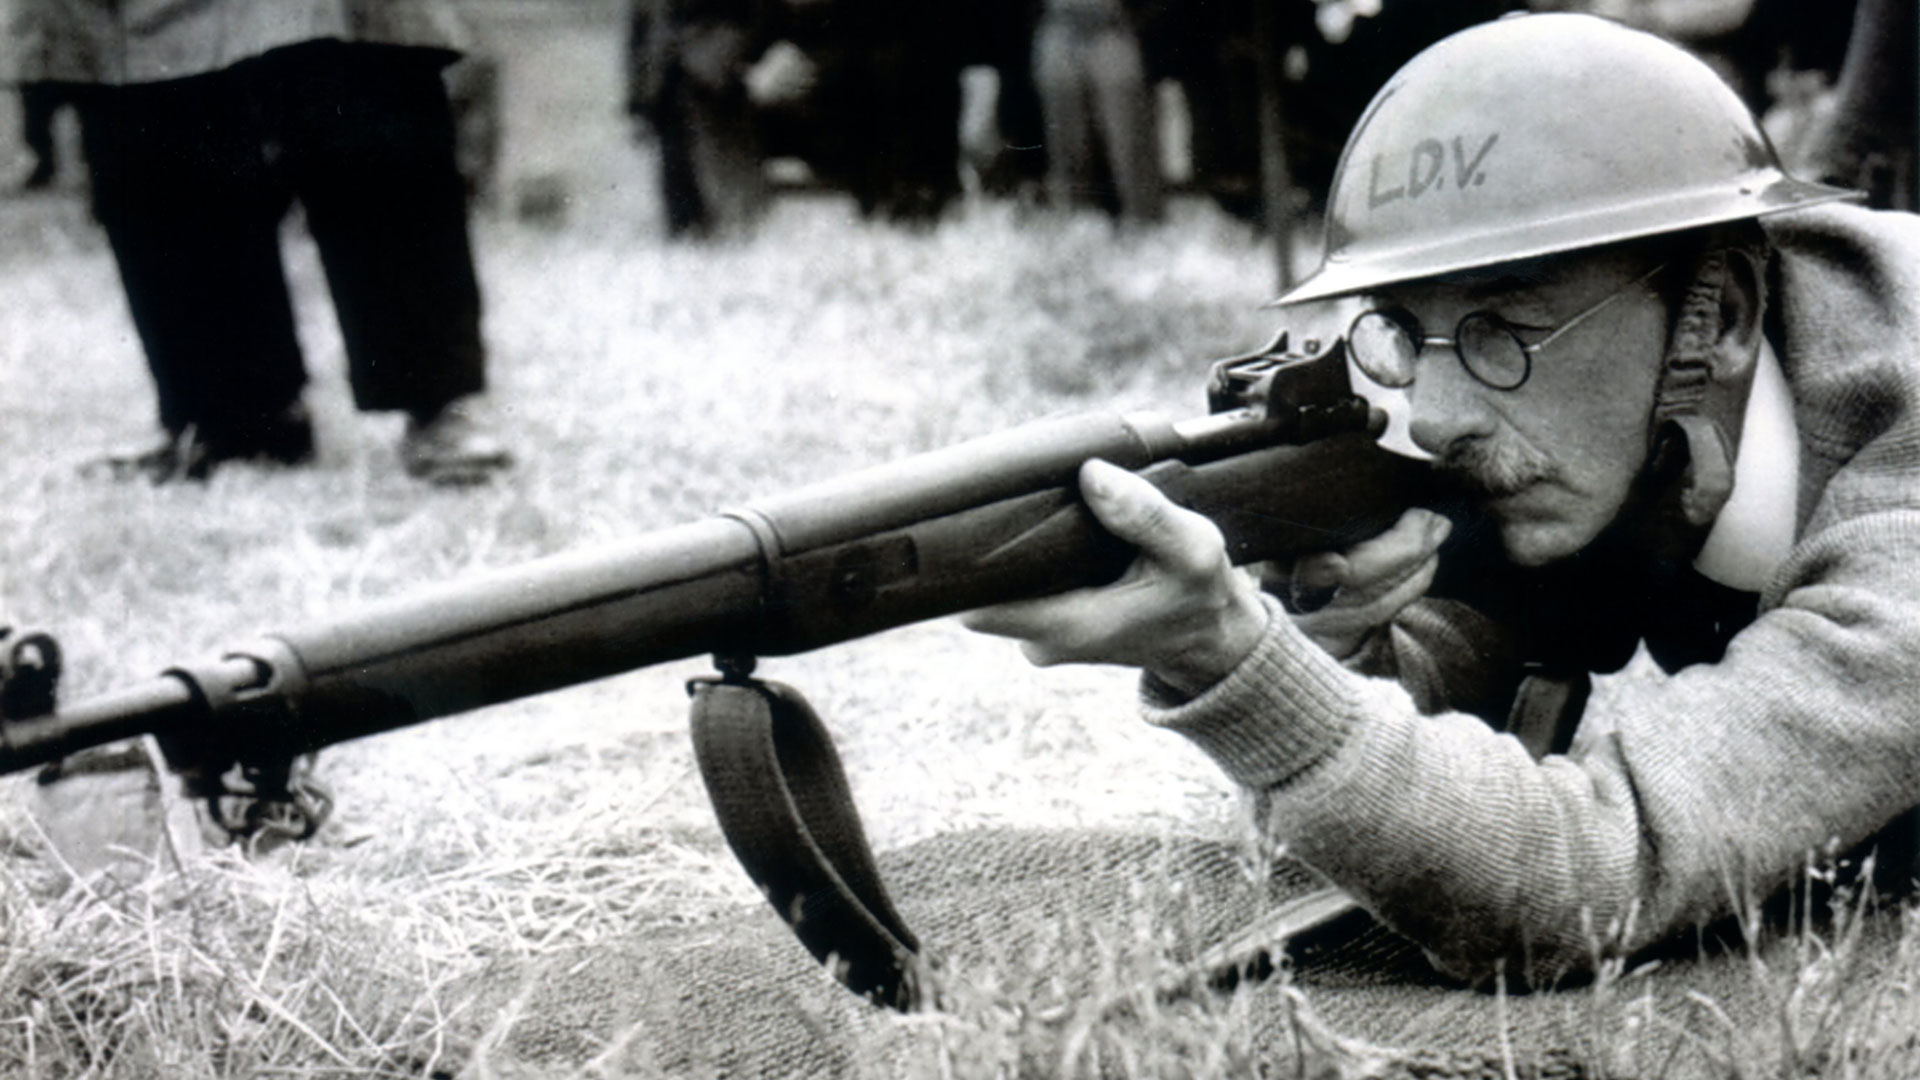 Prior to consolidation into the Home Guard, many units were organized as Local Defense Volunteers (LDV).  This bespectacled veteran practices with a British P14 rifle in .303 Brit.  NARA